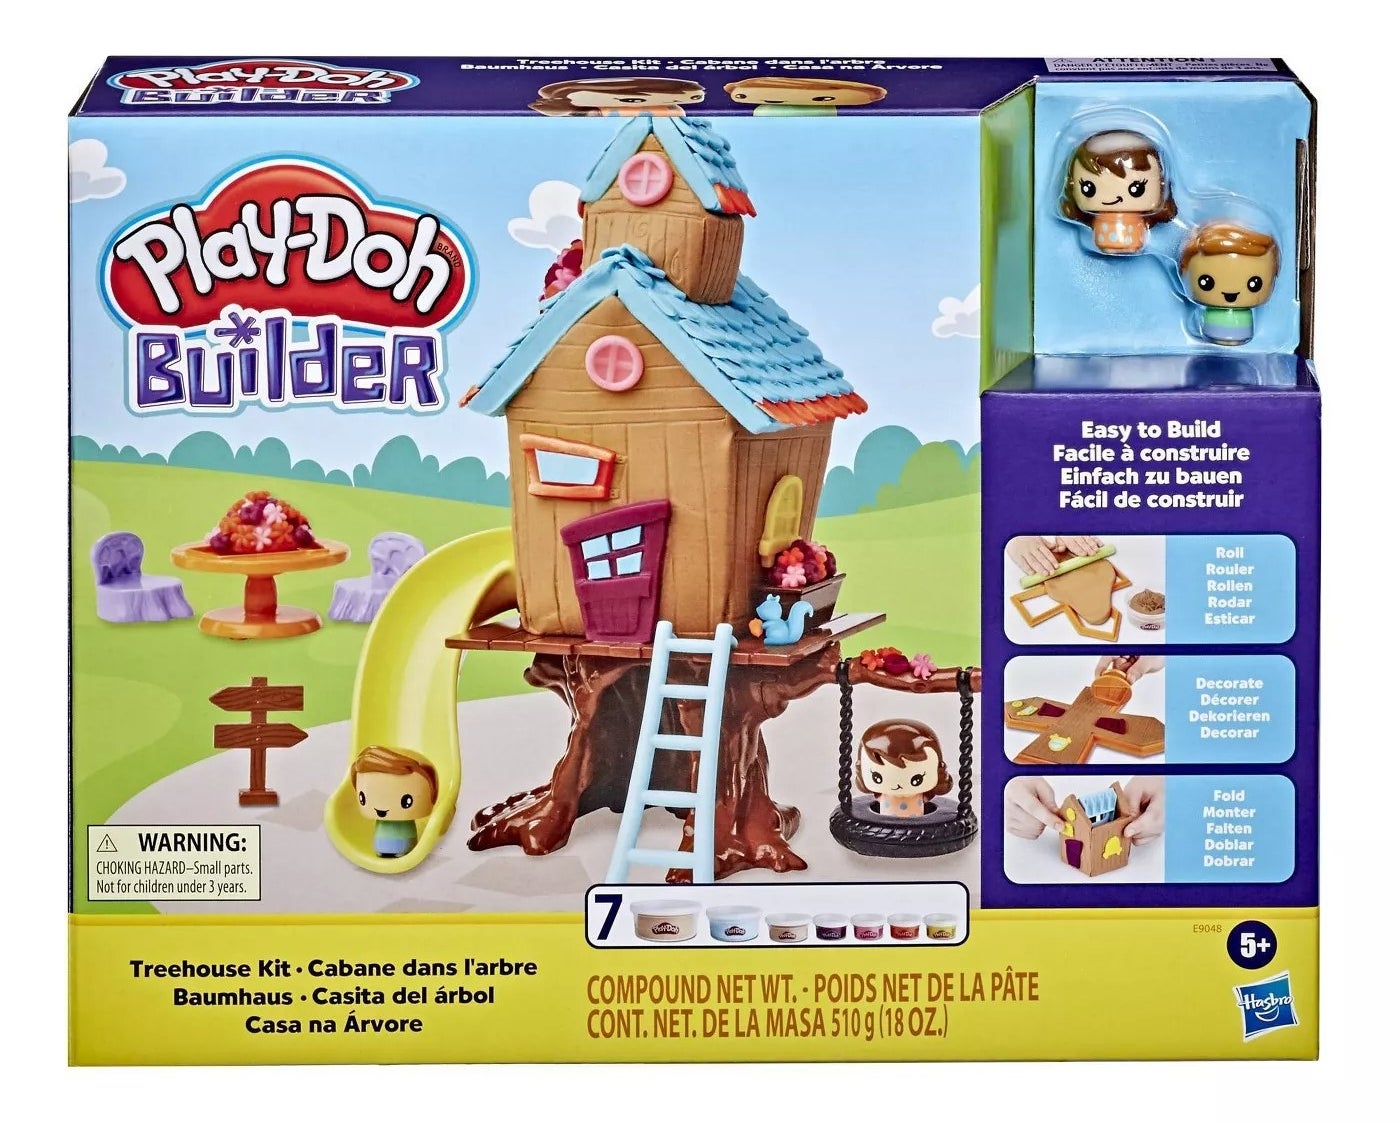 Play-Doh Builder treehouse kit with seven tubs of Play-Doh and two figurines